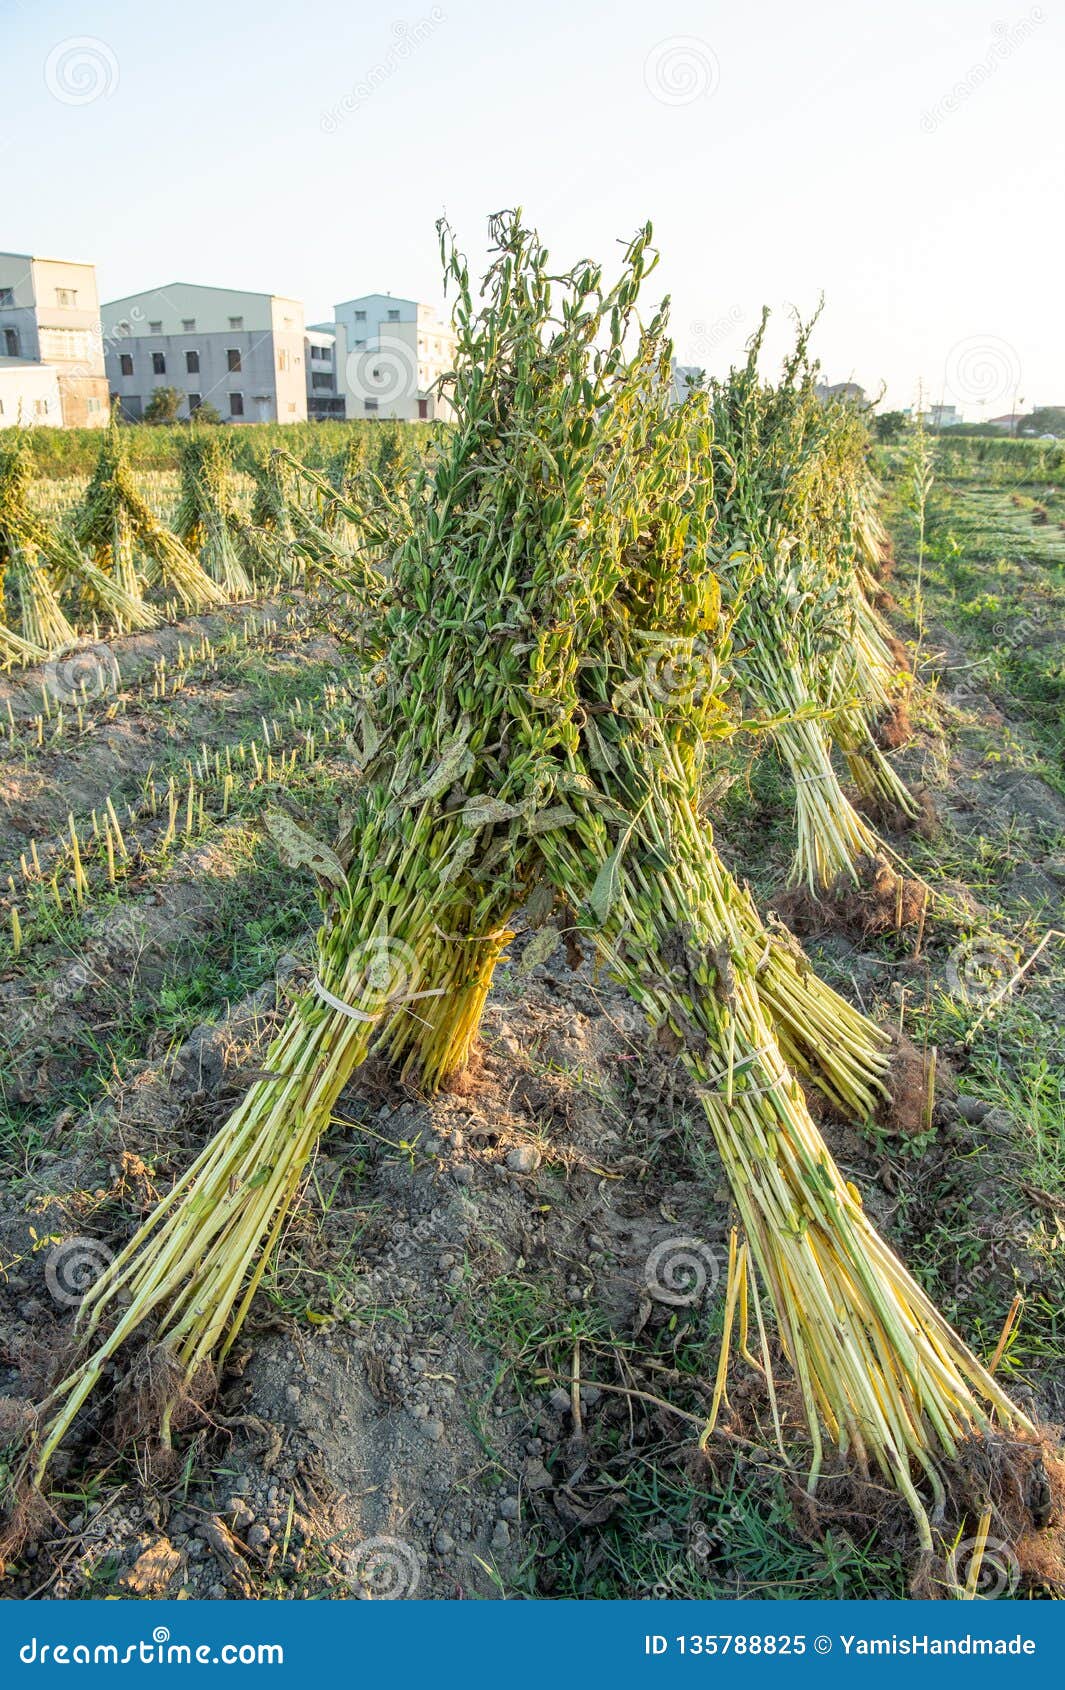 Sesame Field With Sesame Pods And Seeds In Xigang Tainan Taiwan Close Up Macro Bokeh Stock Image Image Of Food Field 135788825